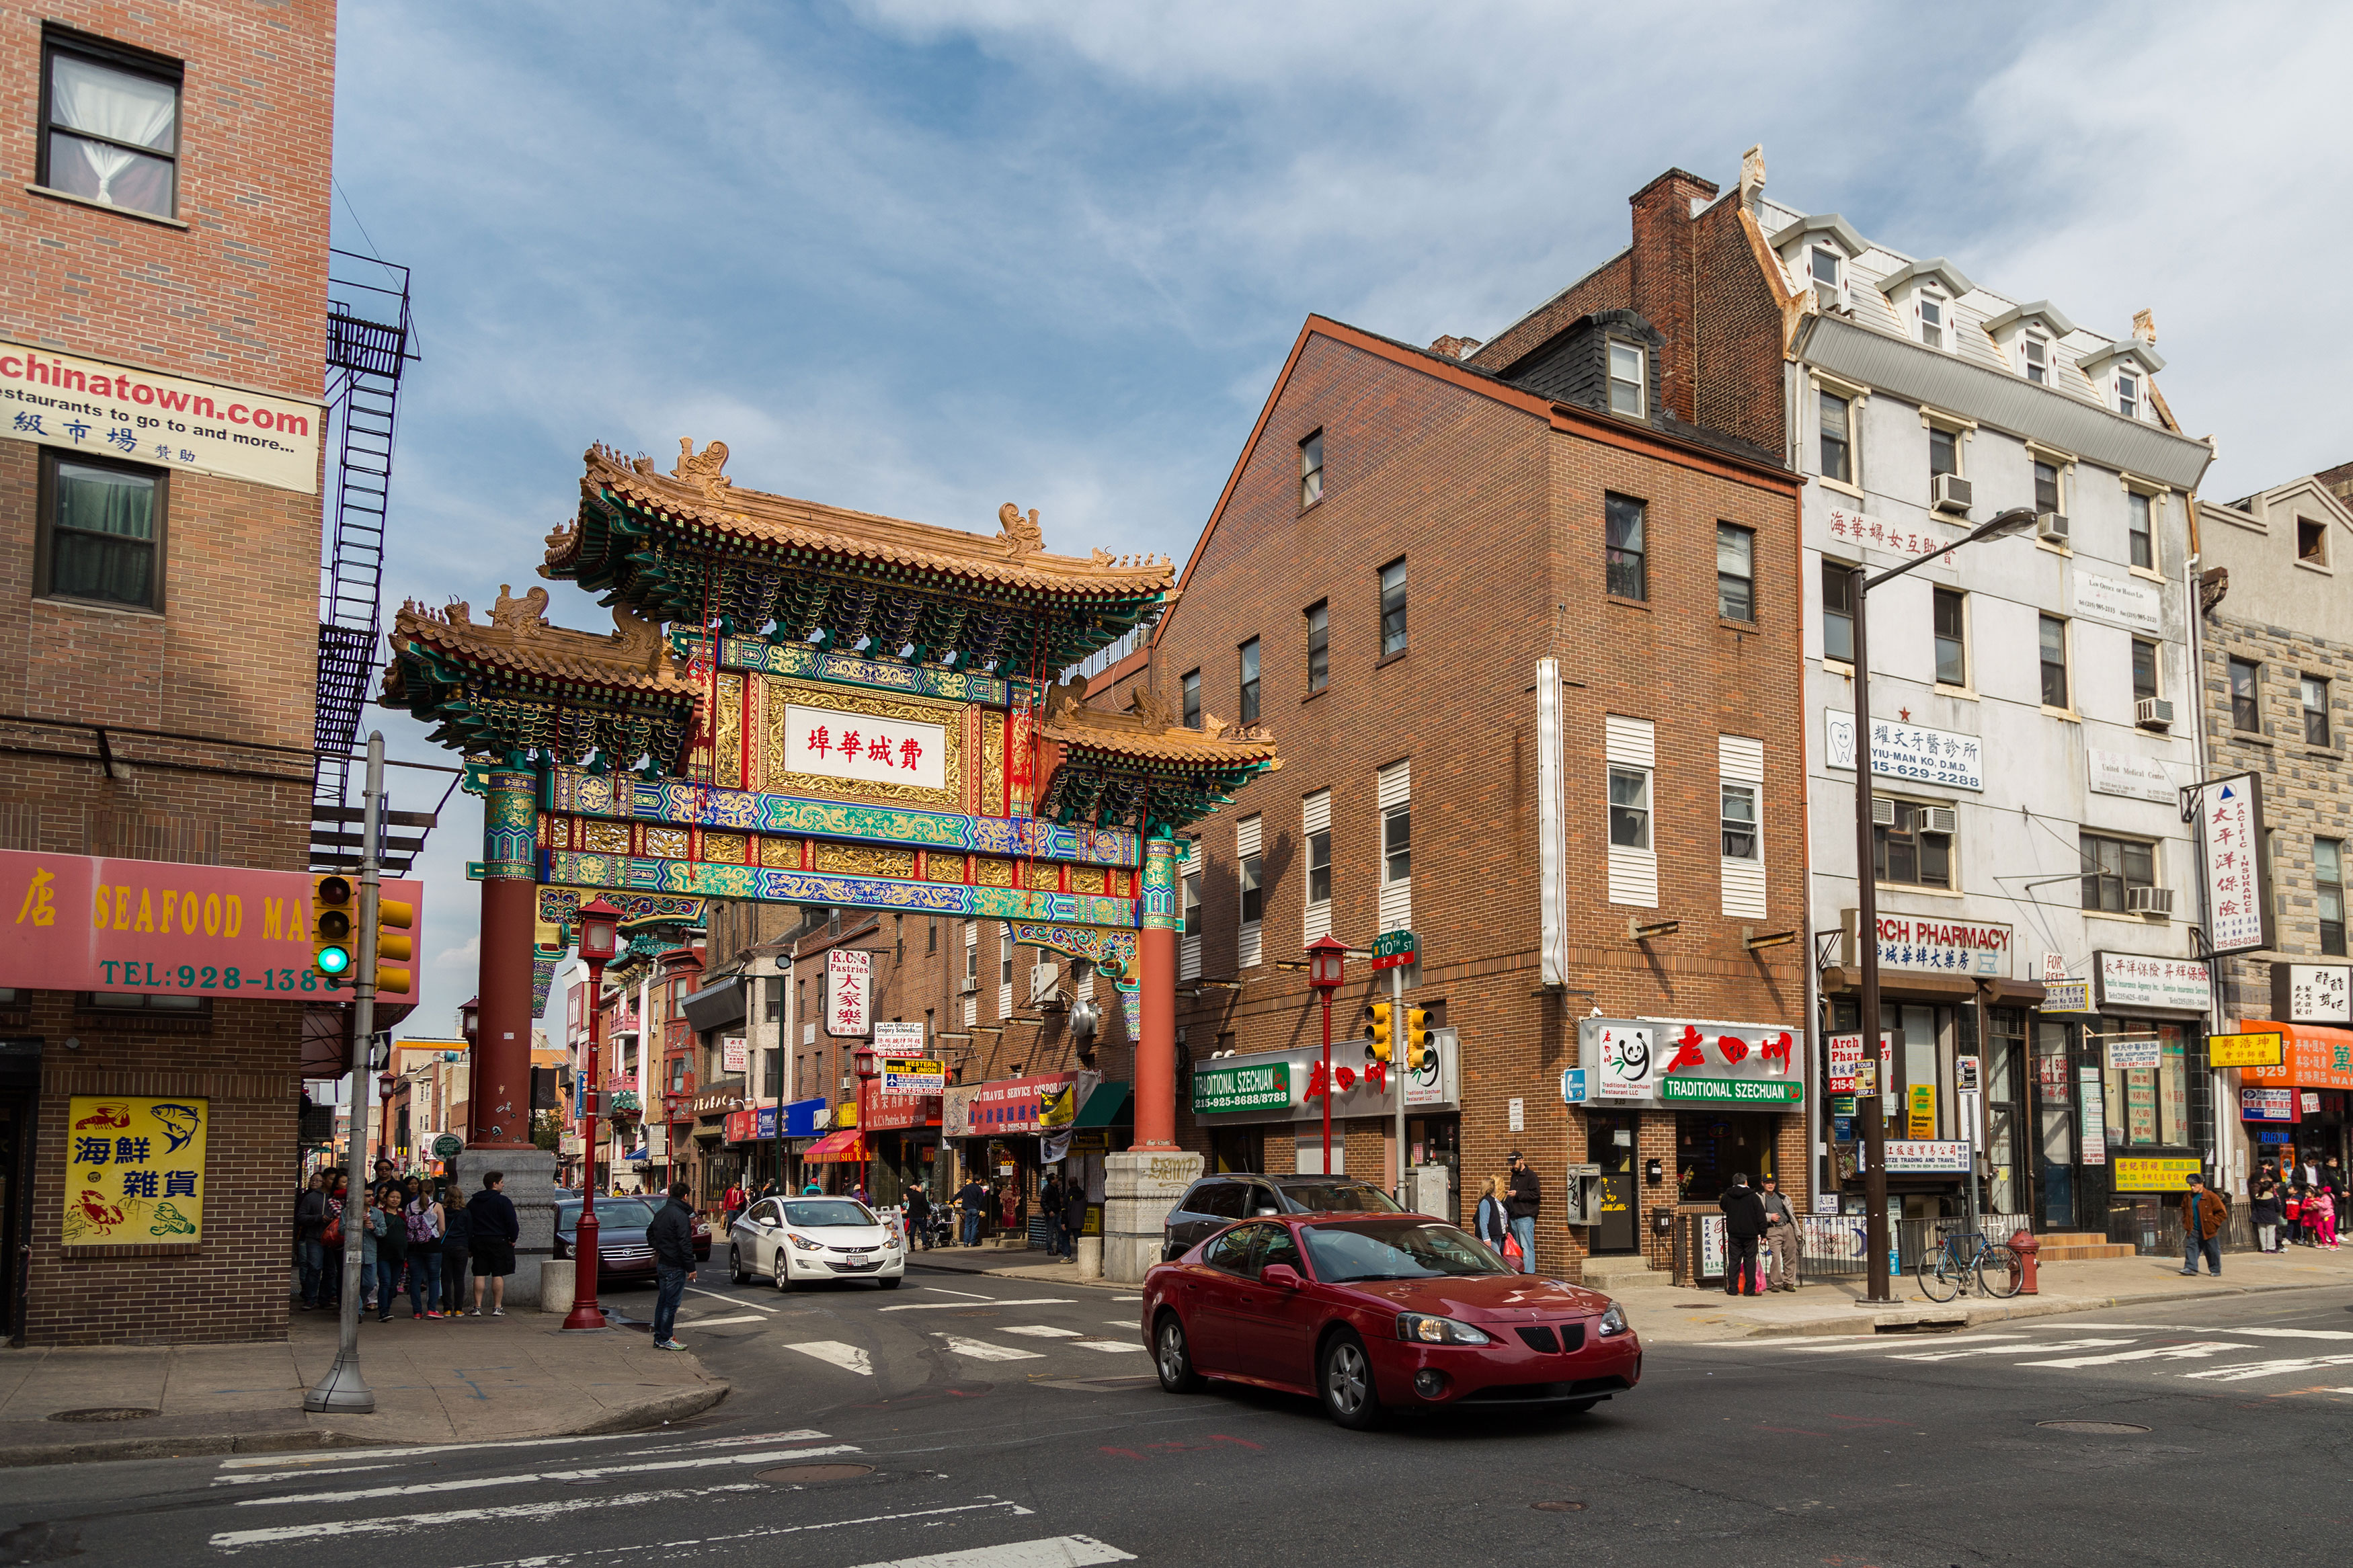 The Chinatown Friendship Arch, created in 1984, serves as the gateway to the historic neighborhood.